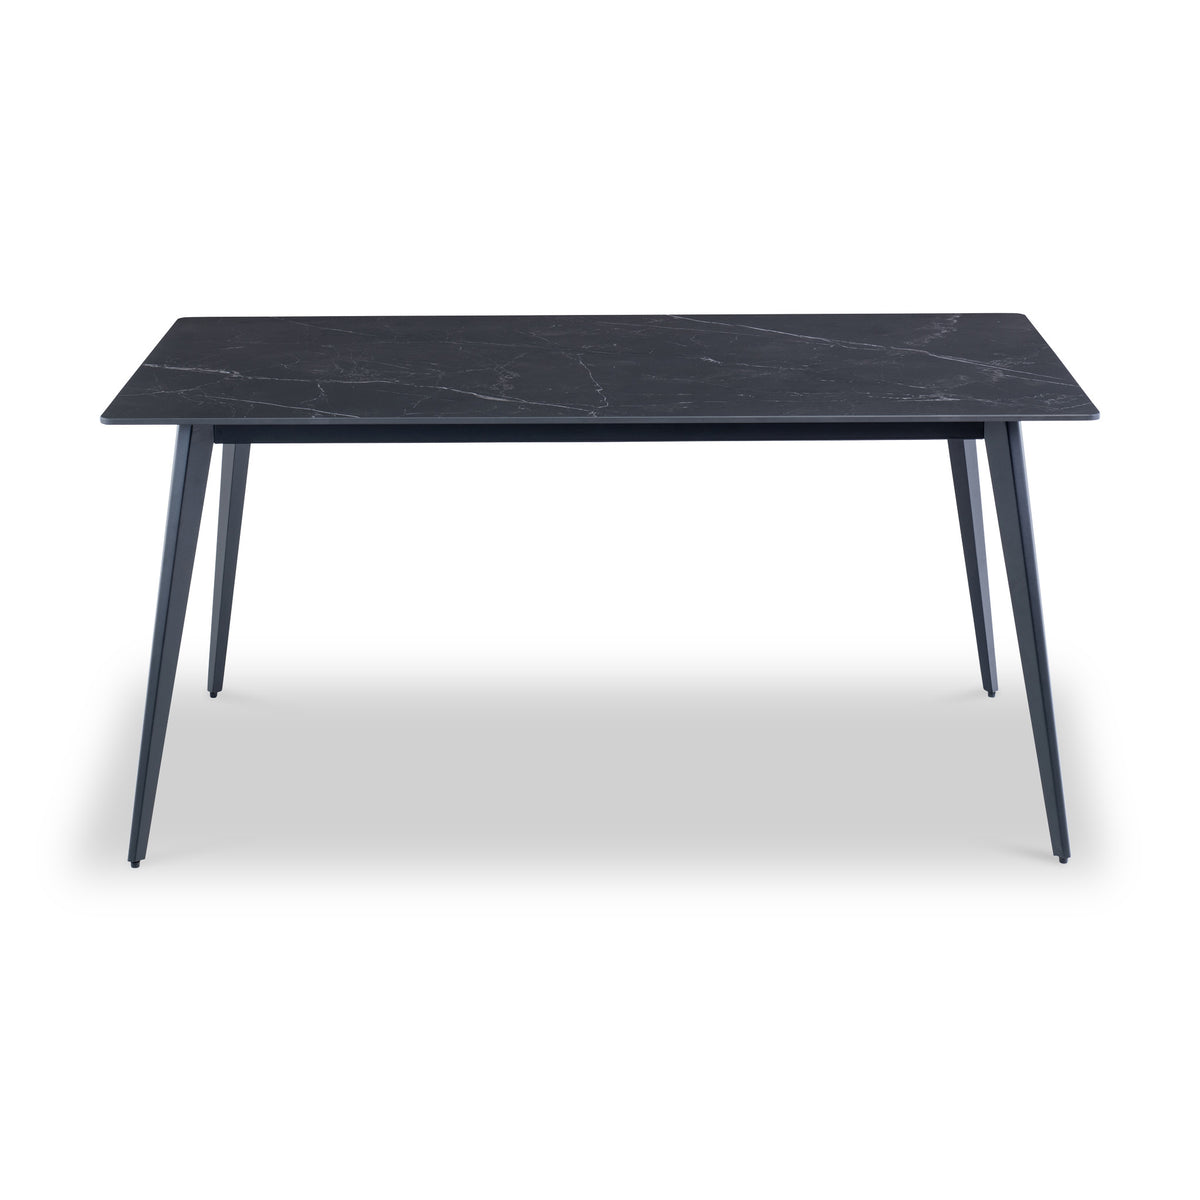 Owen Black 160cm Sintered Stone Dining Table from Roseland Furniture